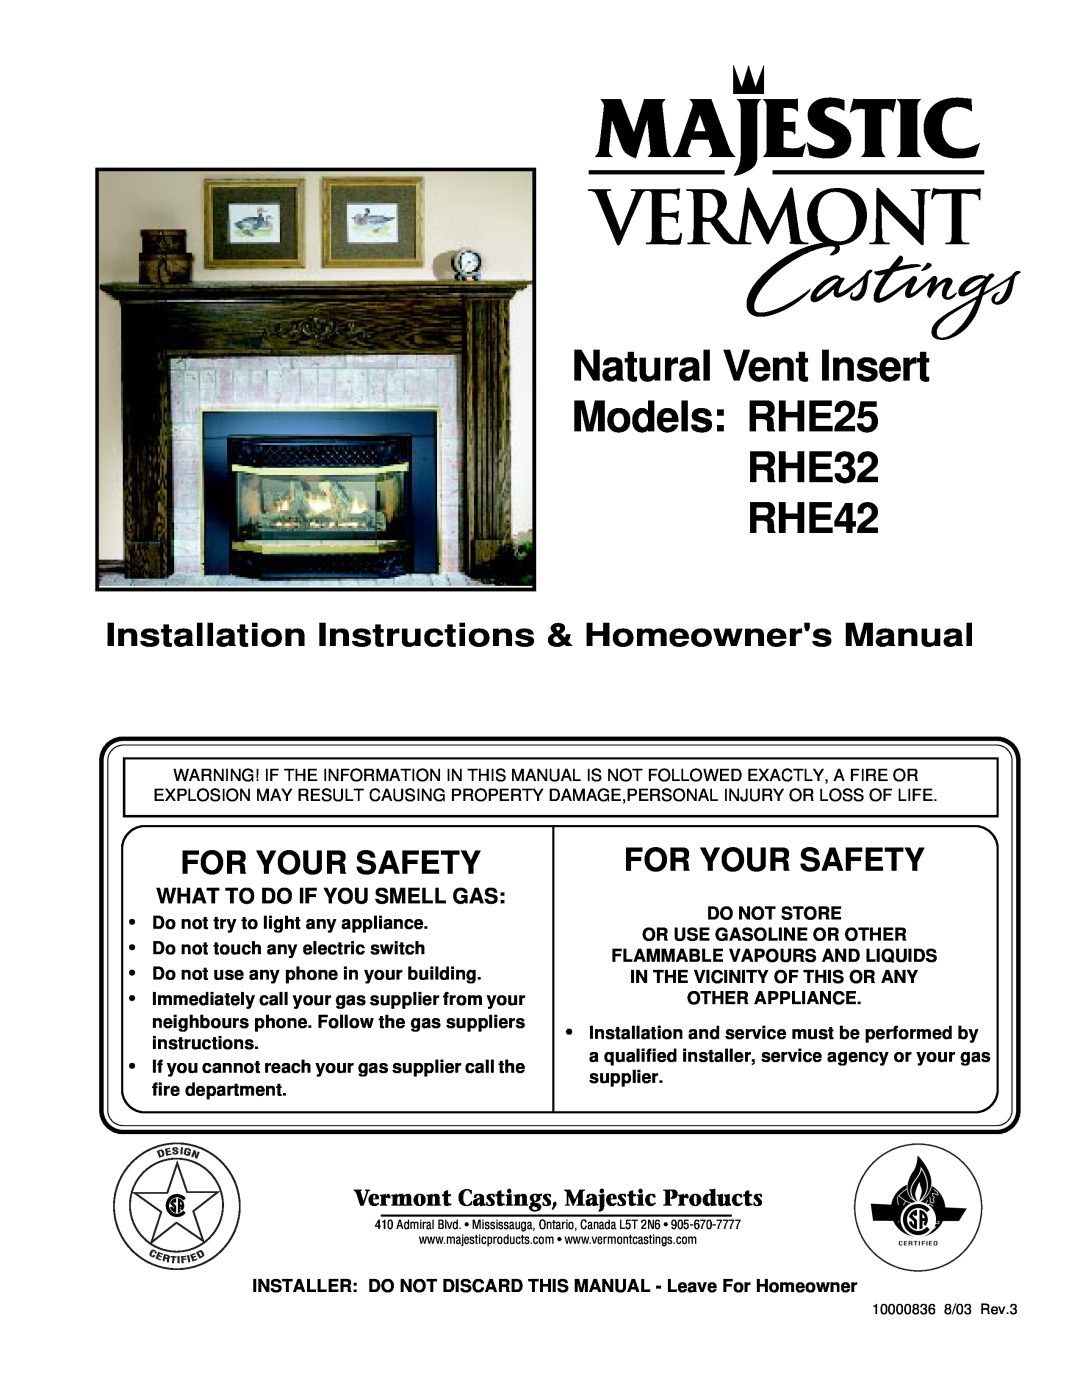 Vermont Casting installation instructions Natural Vent Insert Models RHE25 RHE32 RHE42, For Your Safety 